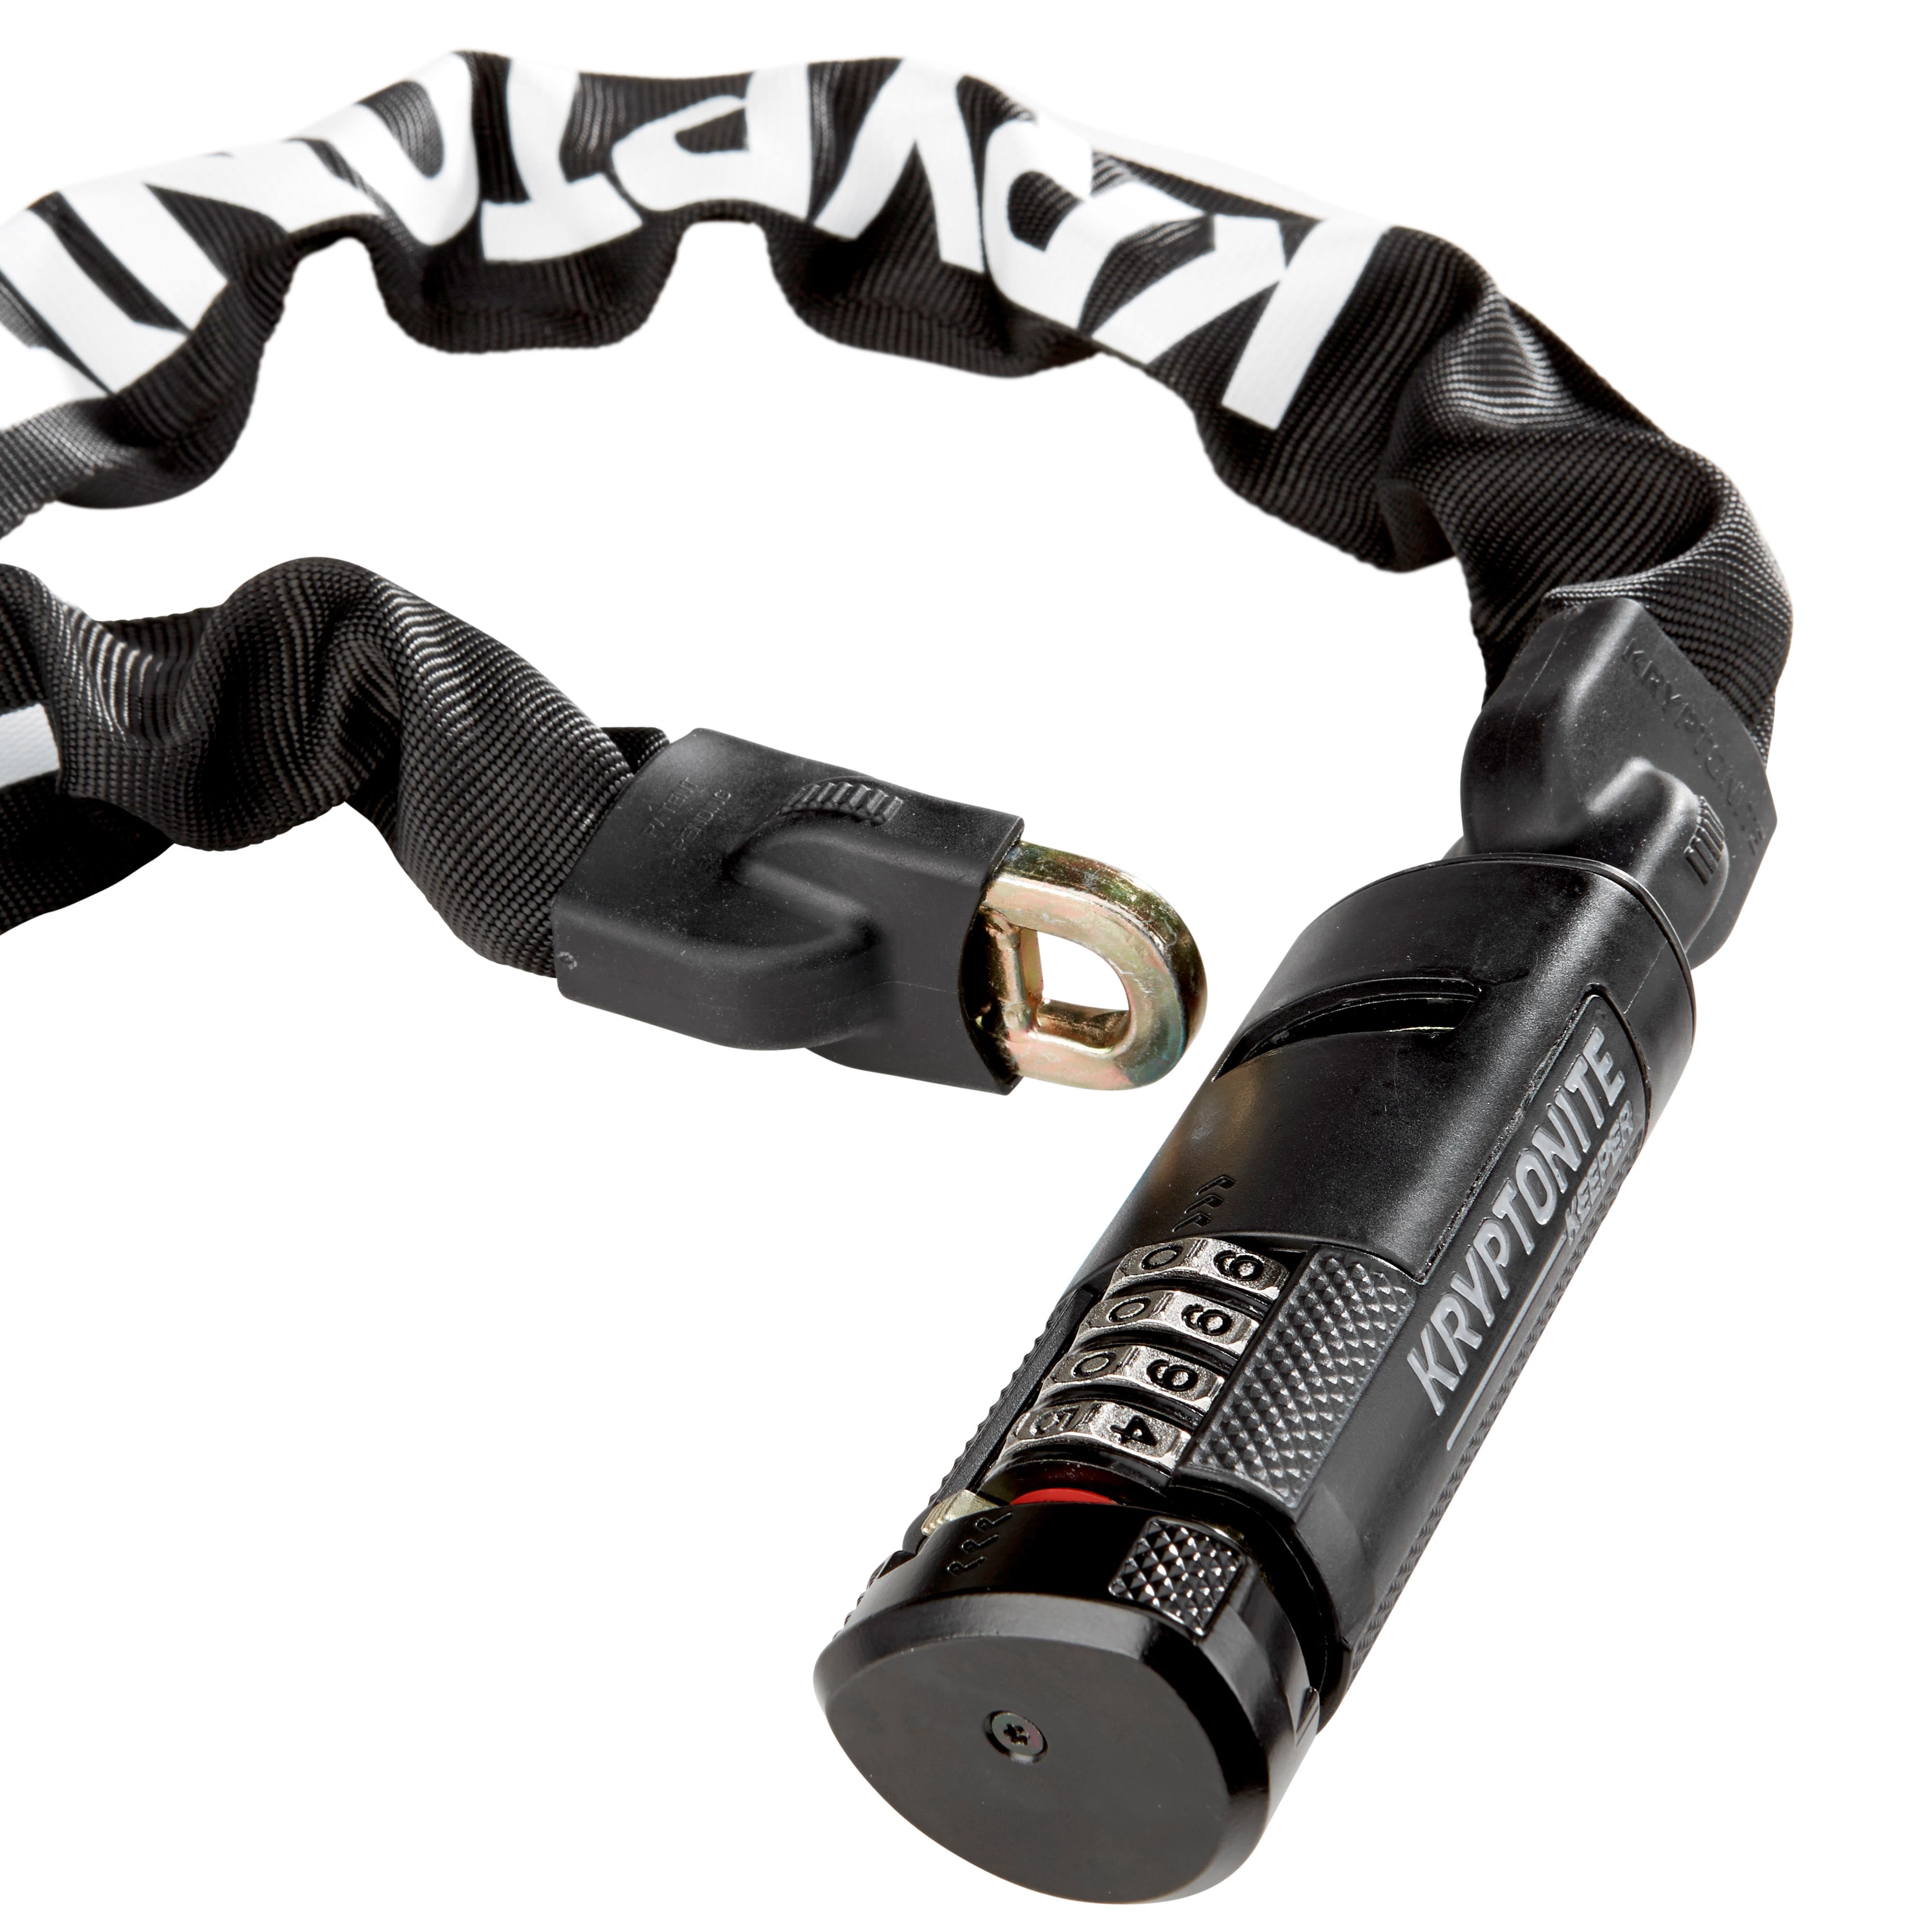 Kryptonite Keeper 411 Combo Chain - Black - Sea Sports Cyclery & Outdoor, Hyannis, MA